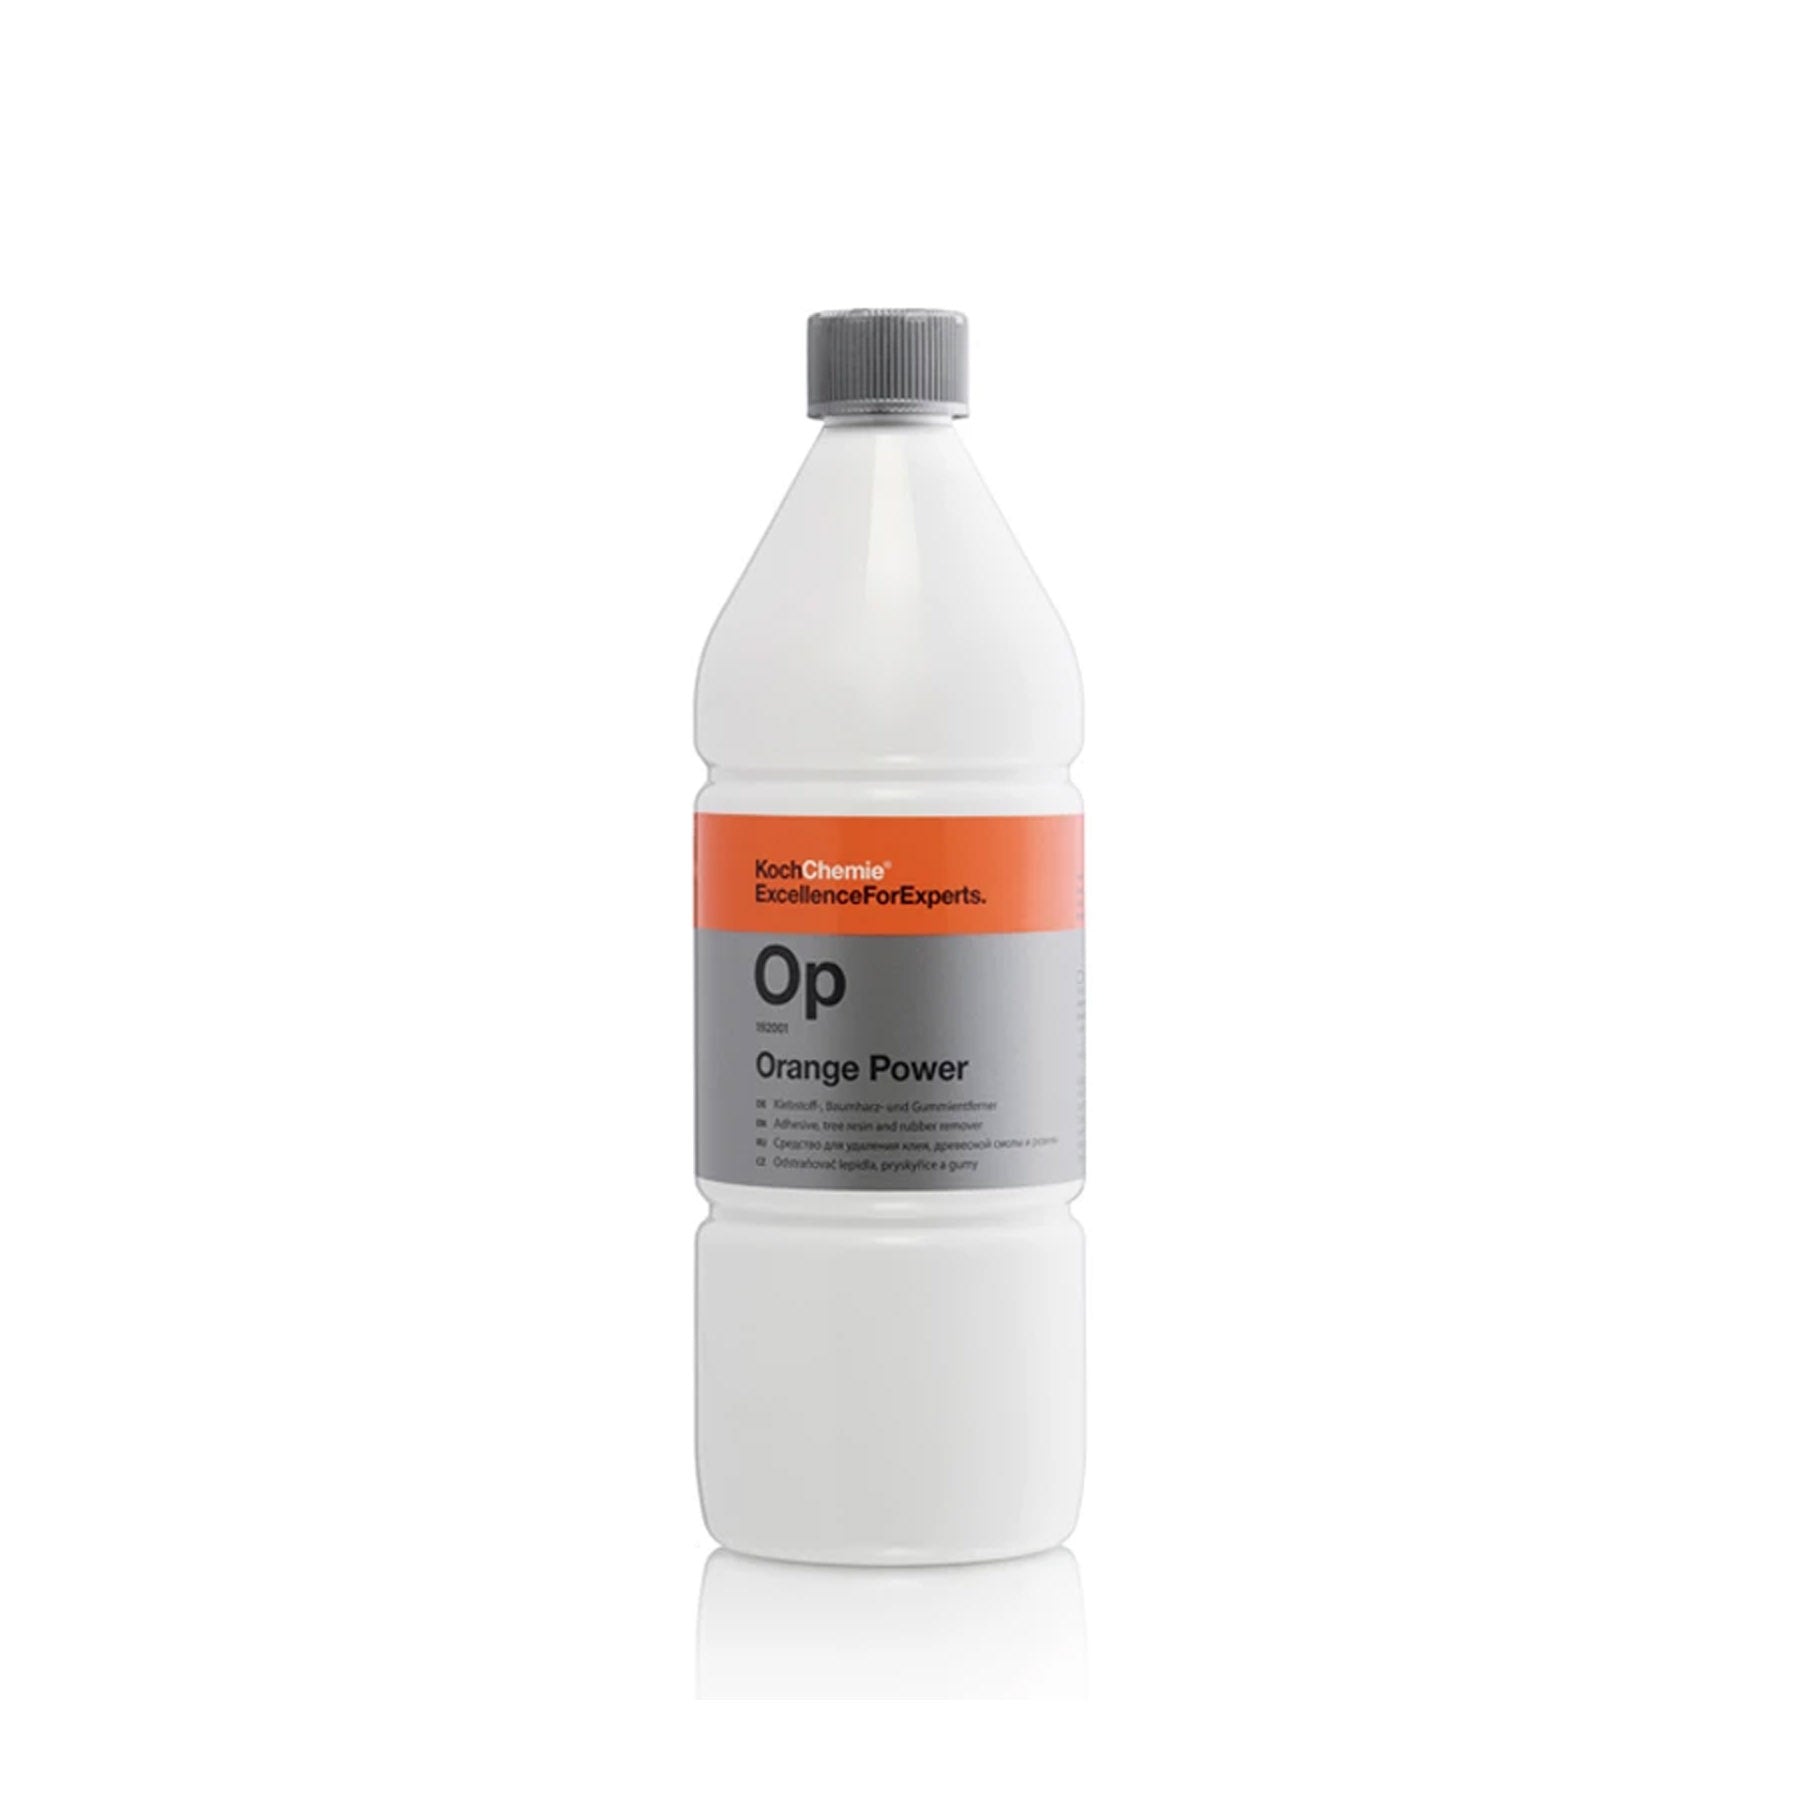 Koch Chemie Orange Power - Adhesive, Tree Sap and Rubber Remover 1 Litre